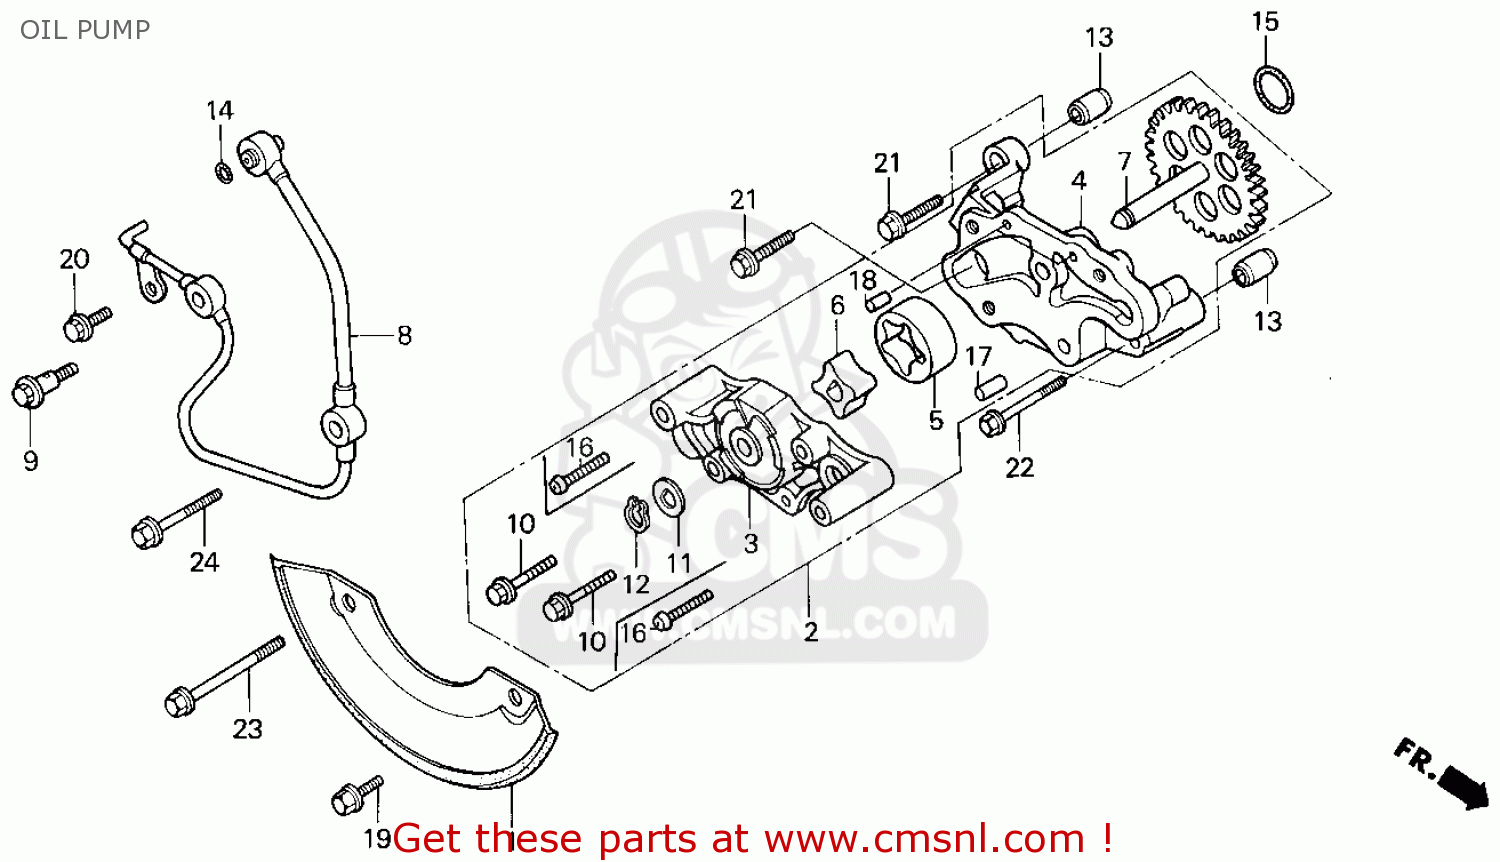 Parts for a 1995 honda fourtrax #1